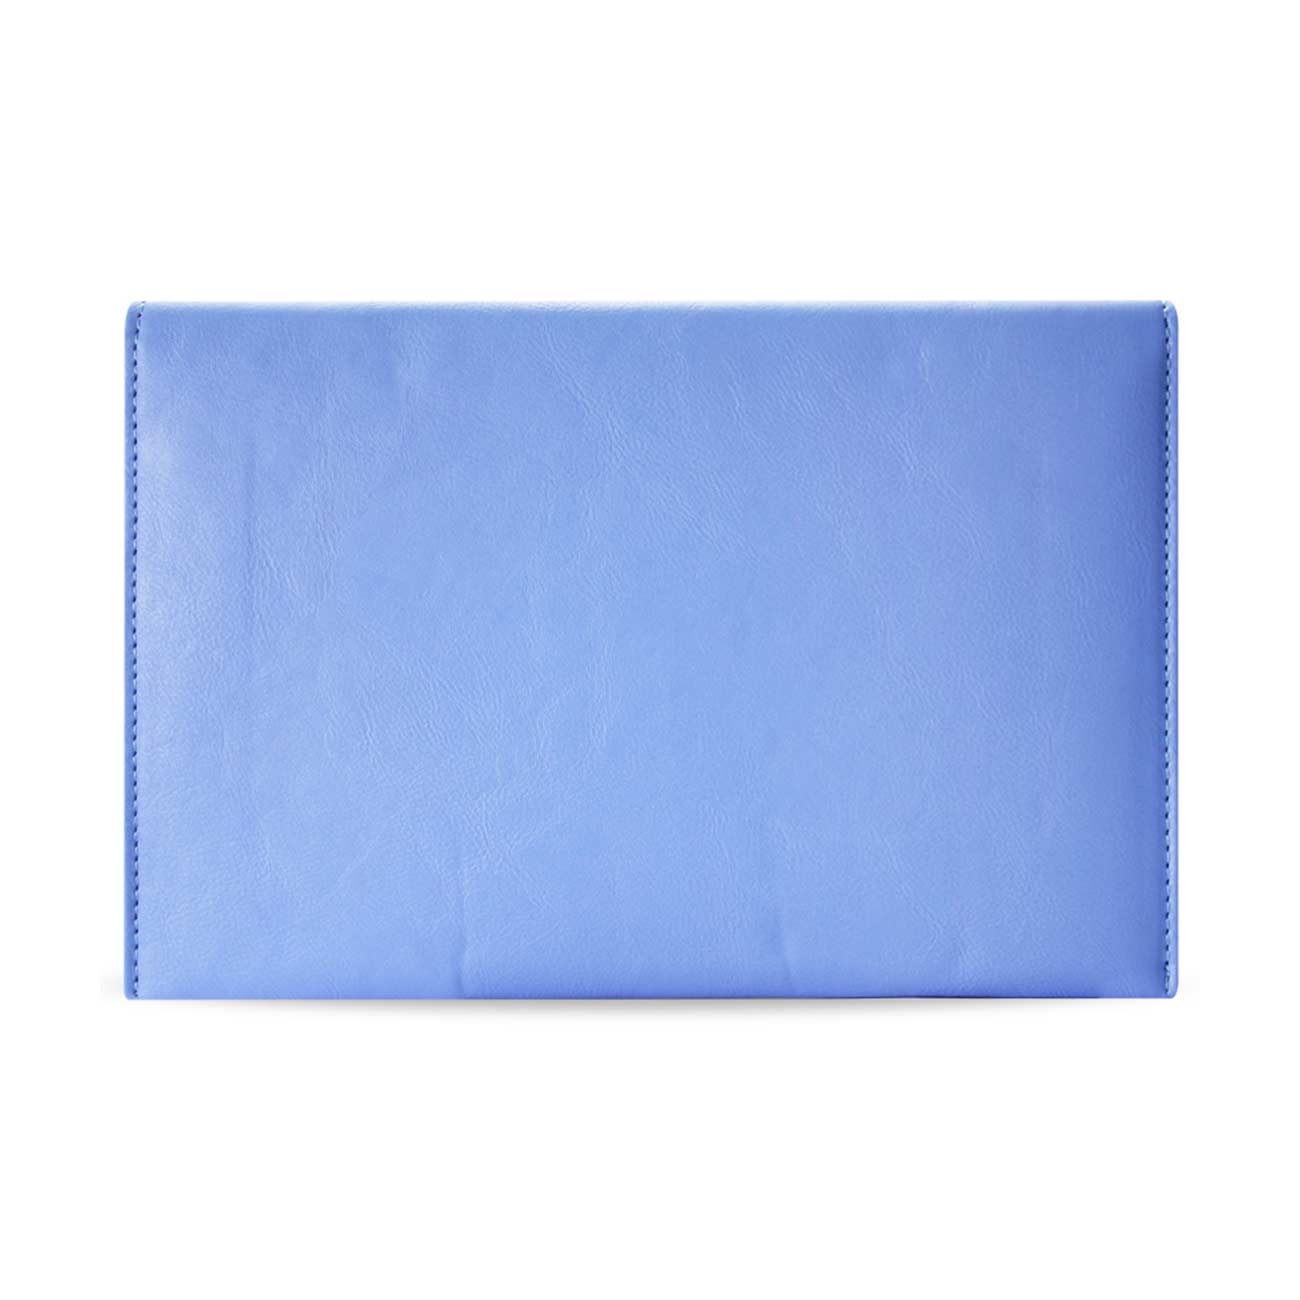 REIKO PREMIUM LEATHER CASE POUCH FOR 7INCHES IPADS AND TABLETS In BLUE